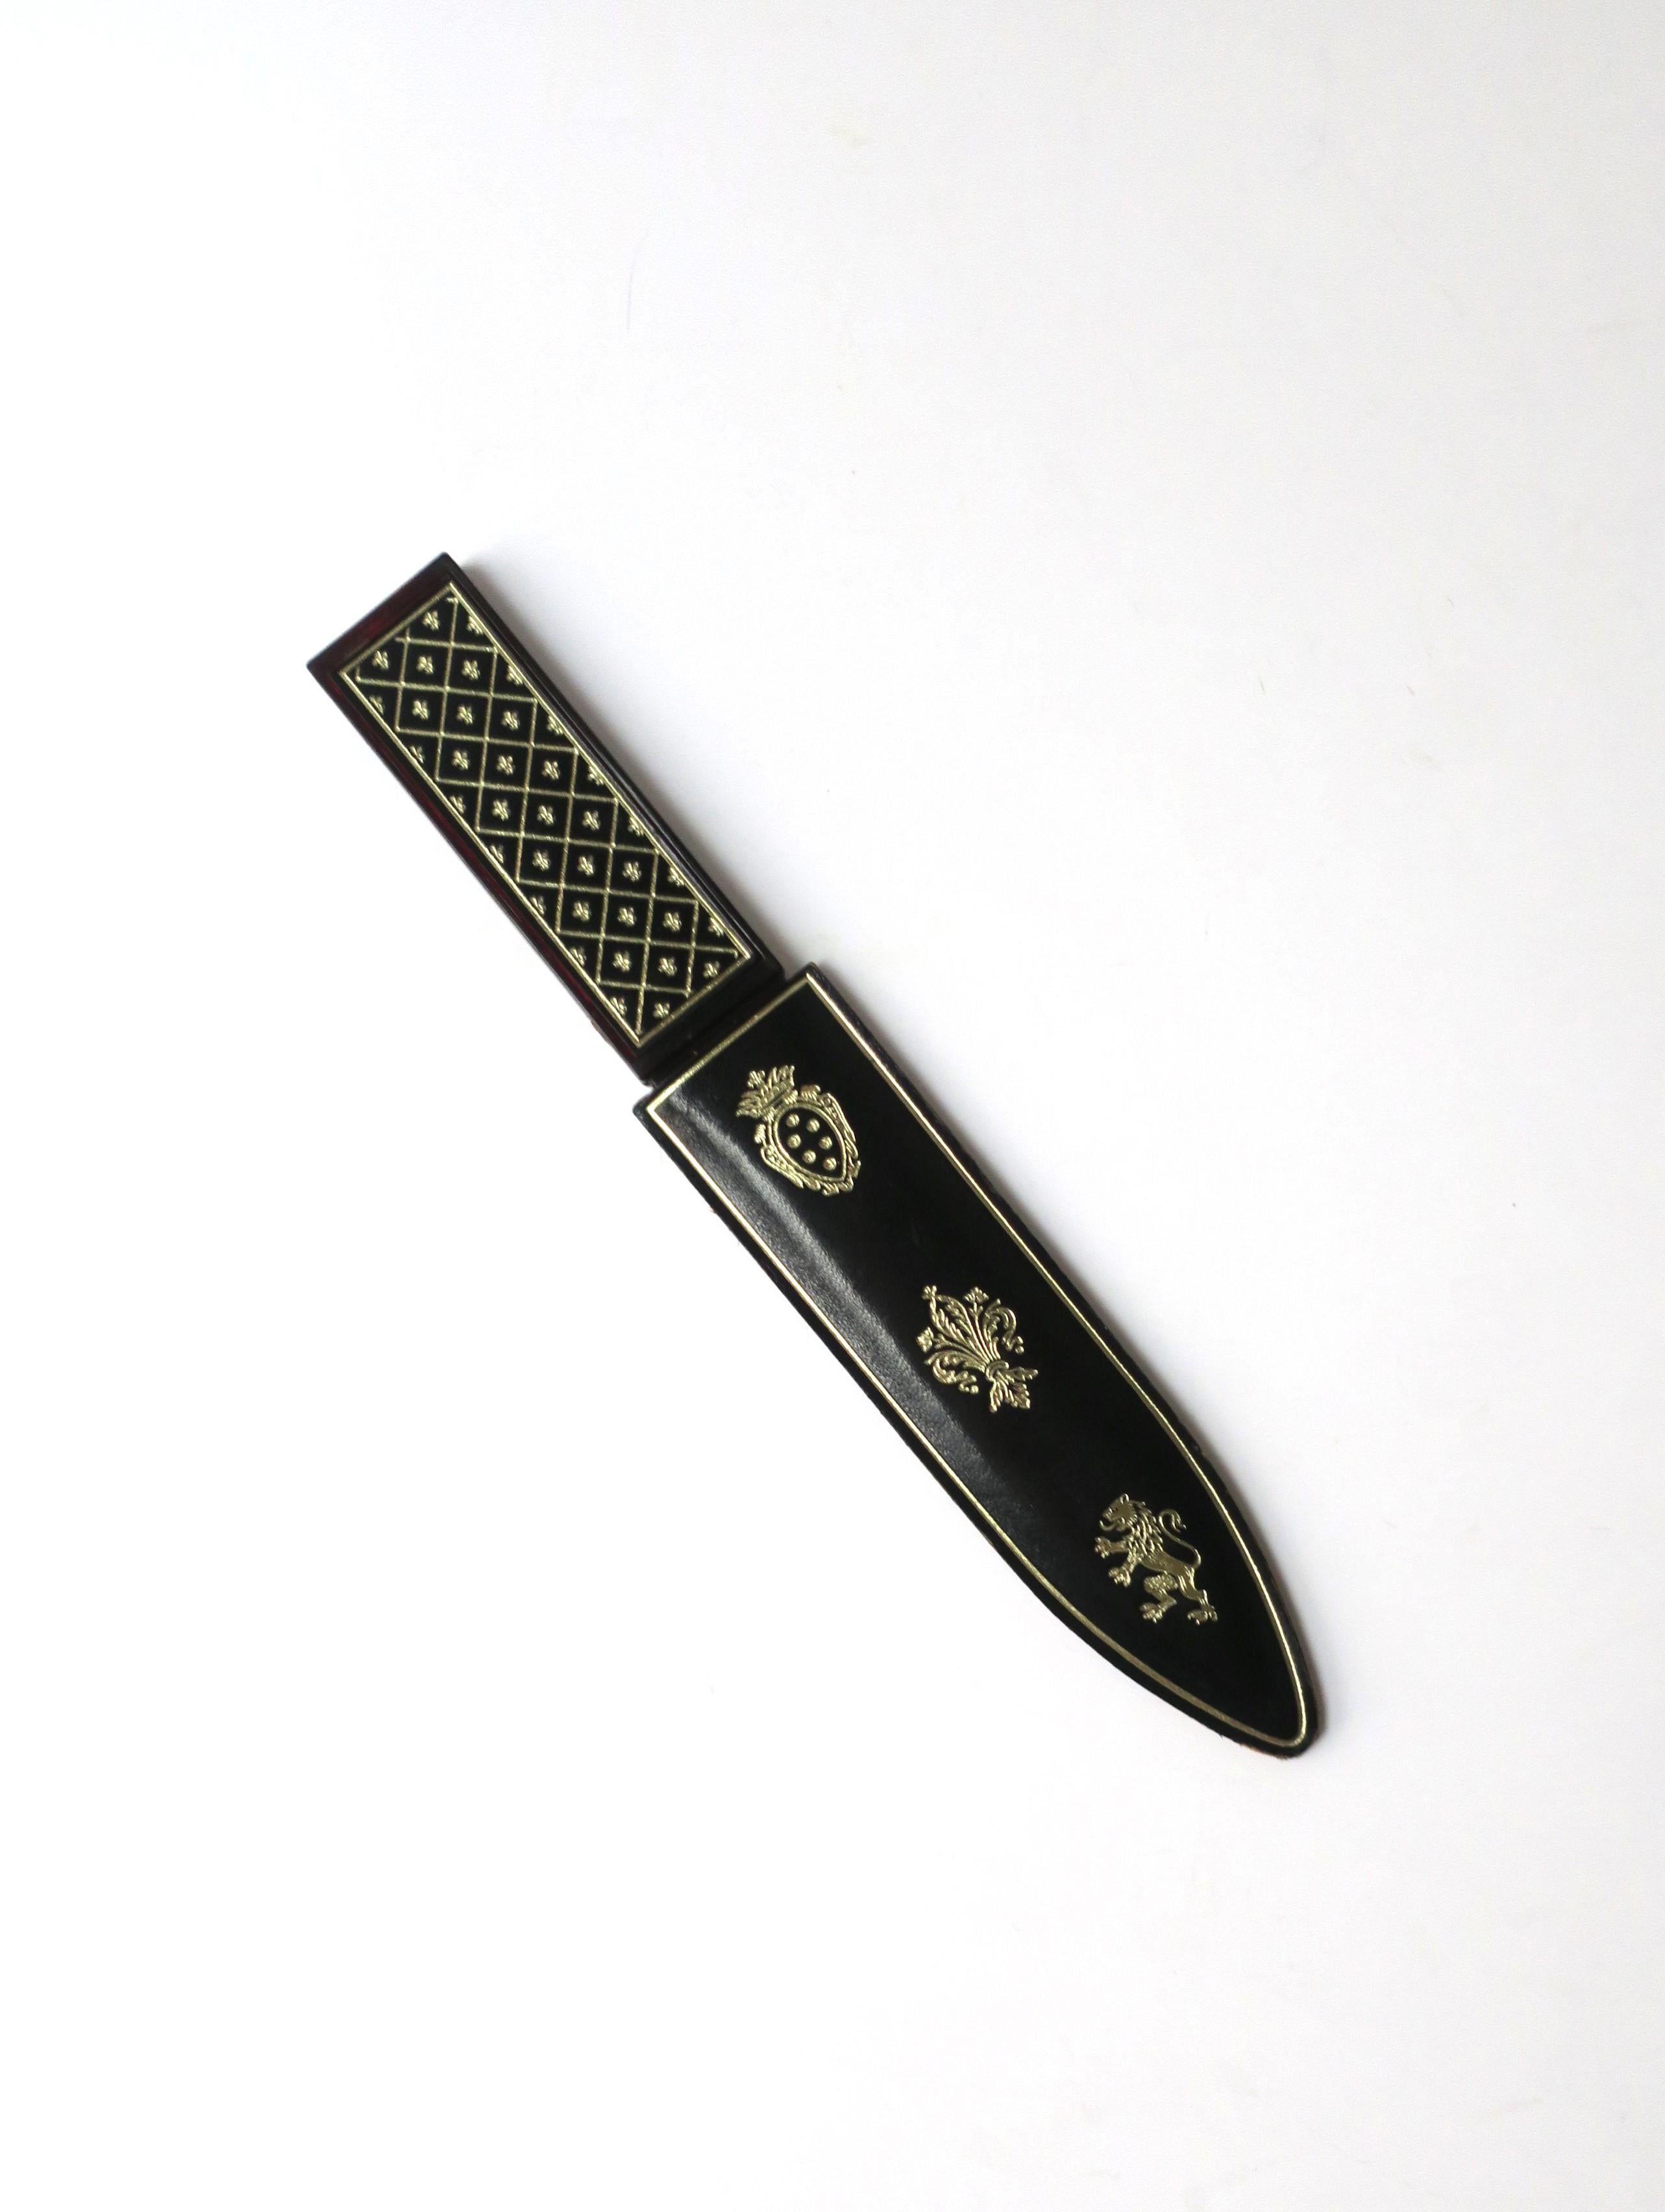 An Italian black leather gold embossed resin letter opener, circa mid-20th century, Italy. Piece is black leather with gold embossed regal design and a translucent resin brown knife blade. Marked 'Made Italy' on acrylic/resin knife area, near